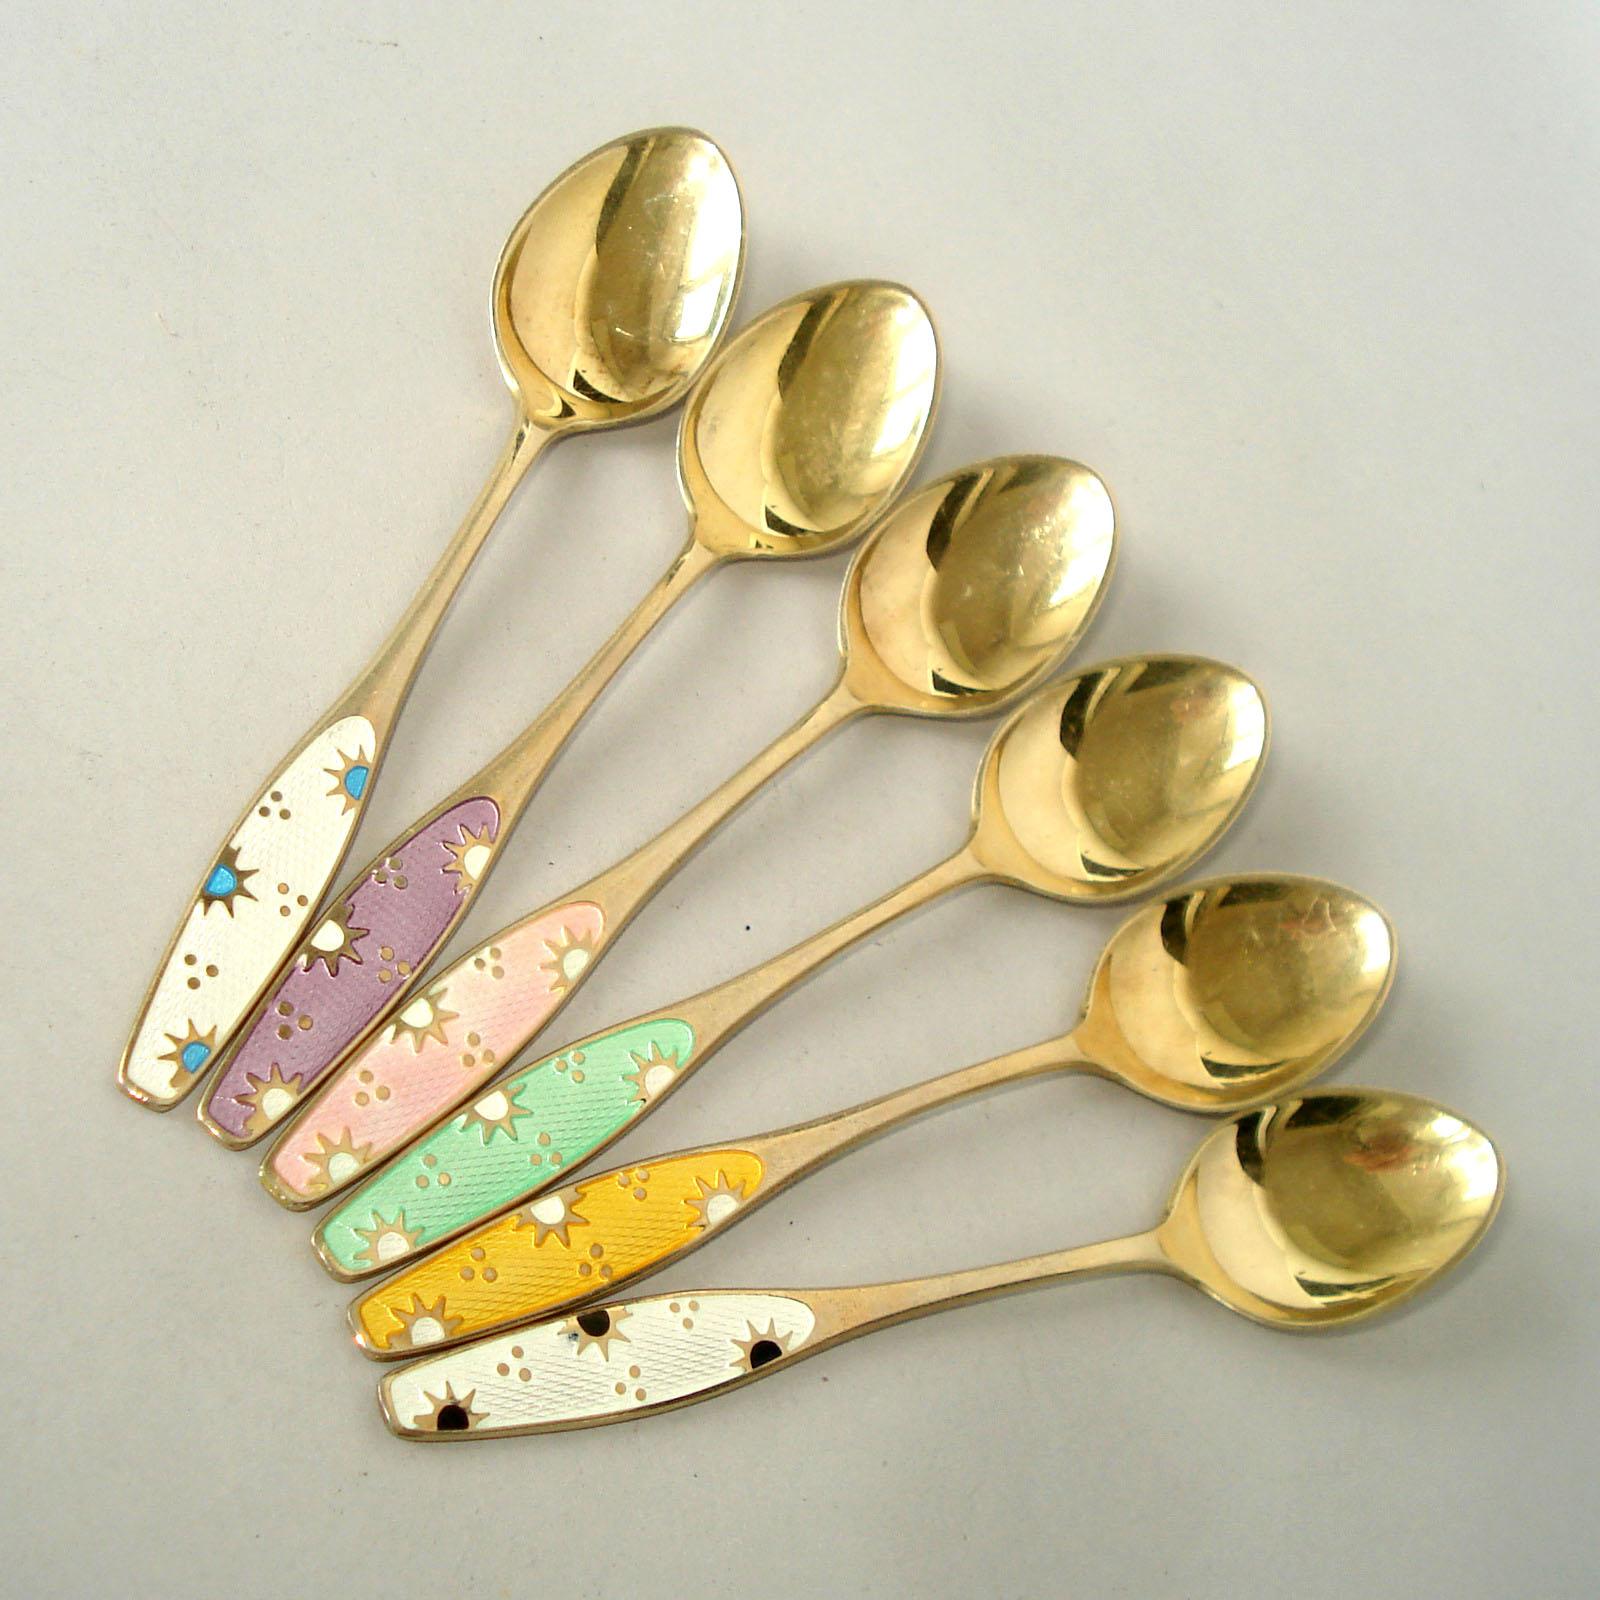 Set of six Danish spoons, sterling silver with polychrome enamel, circa 1930. Hallmarked 